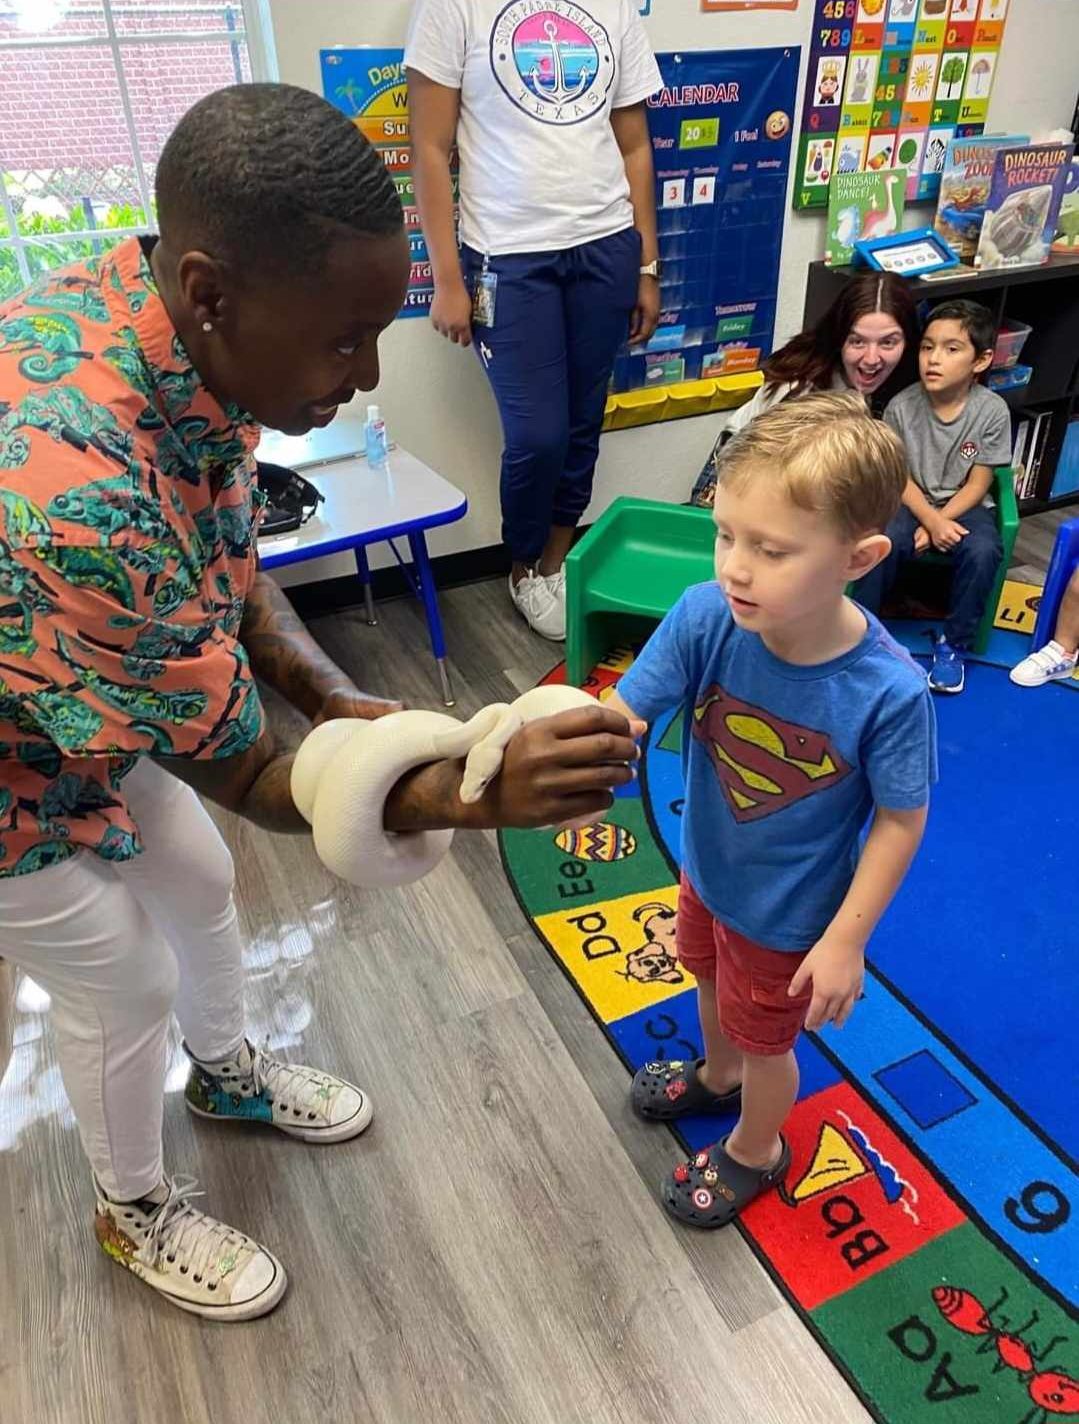 A woman safely introduces a white snake to an elementary classroom. A young boy stands ready to pet the snake.